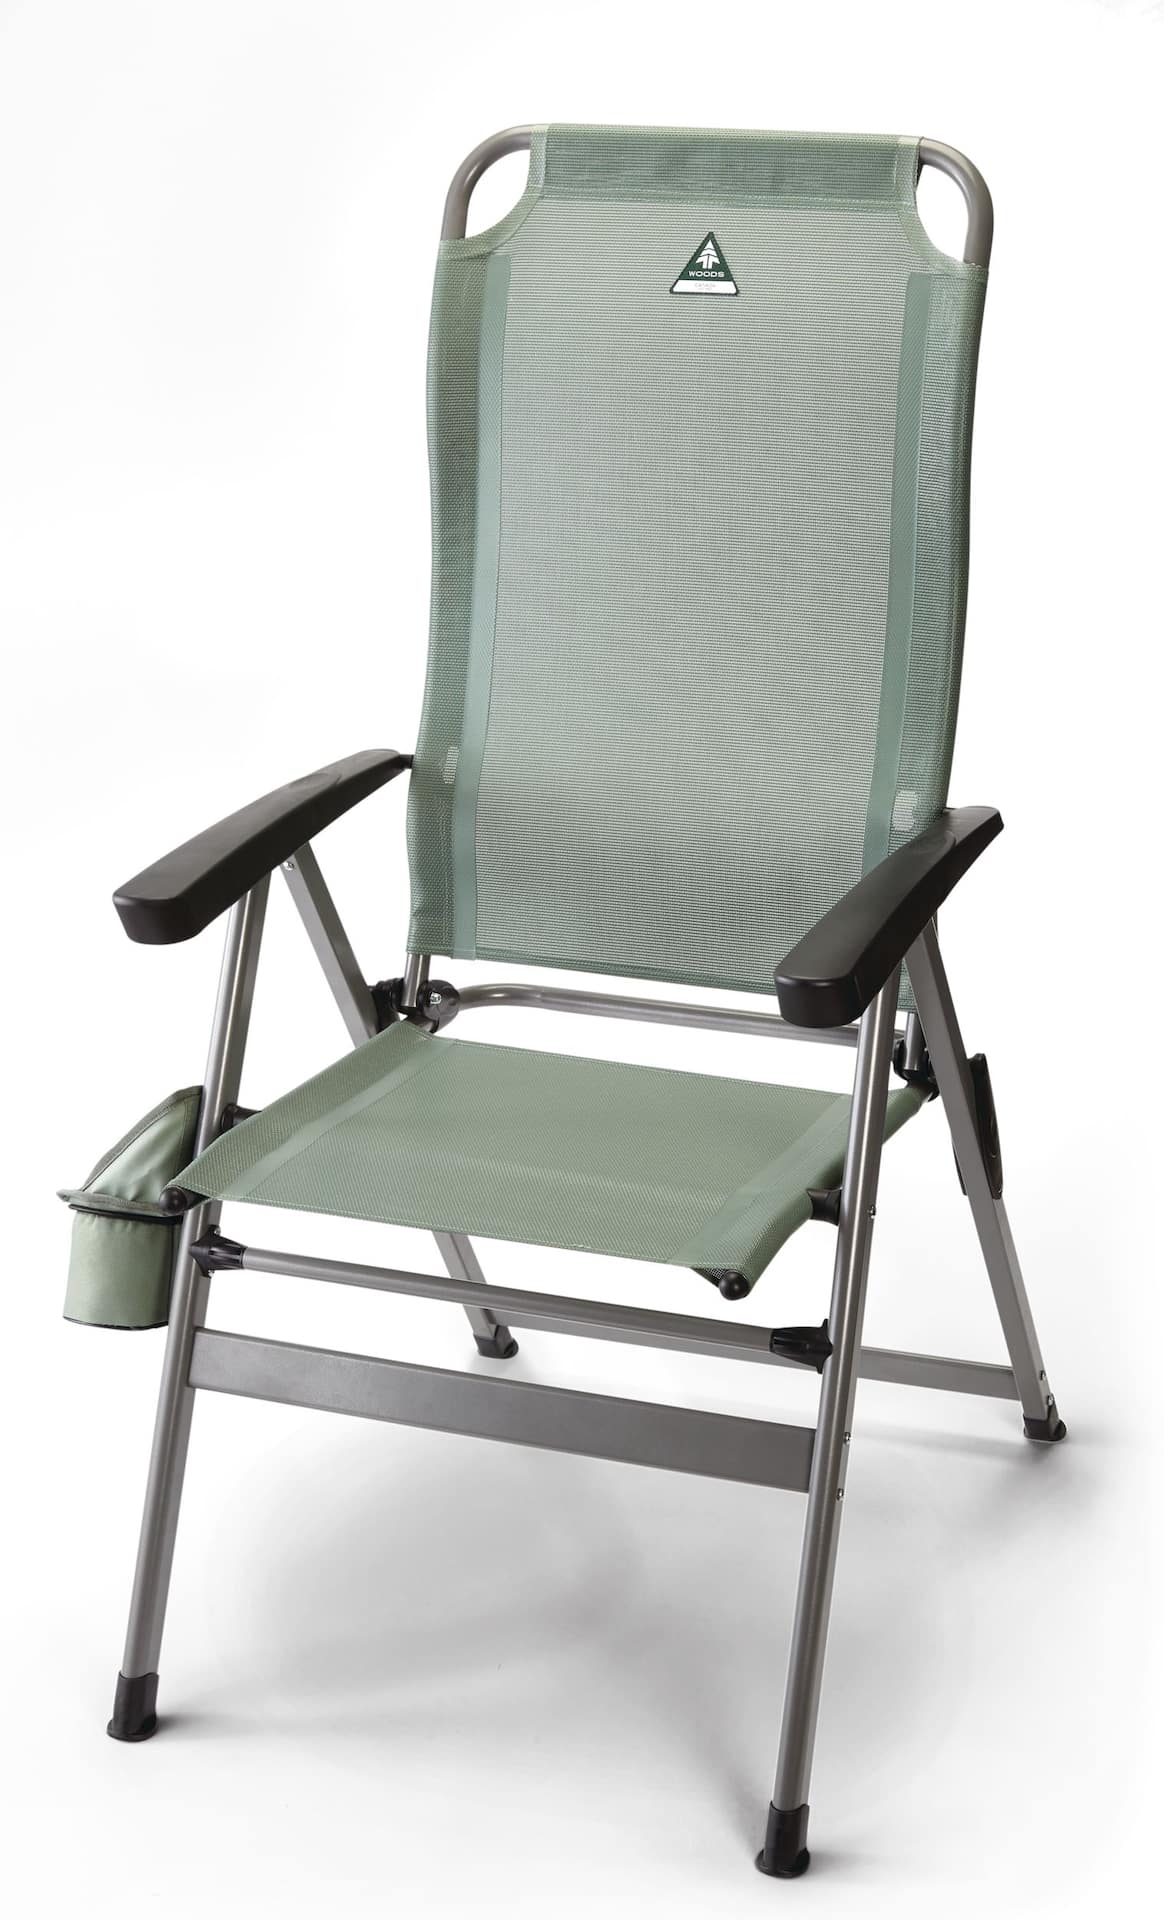 https://media-www.canadiantire.ca/product/playing/camping/camping-furniture/0763213/woods-deluxe-rv-chair-0484d4de-d669-4d2b-bd16-861cdf563319-jpgrendition.jpg